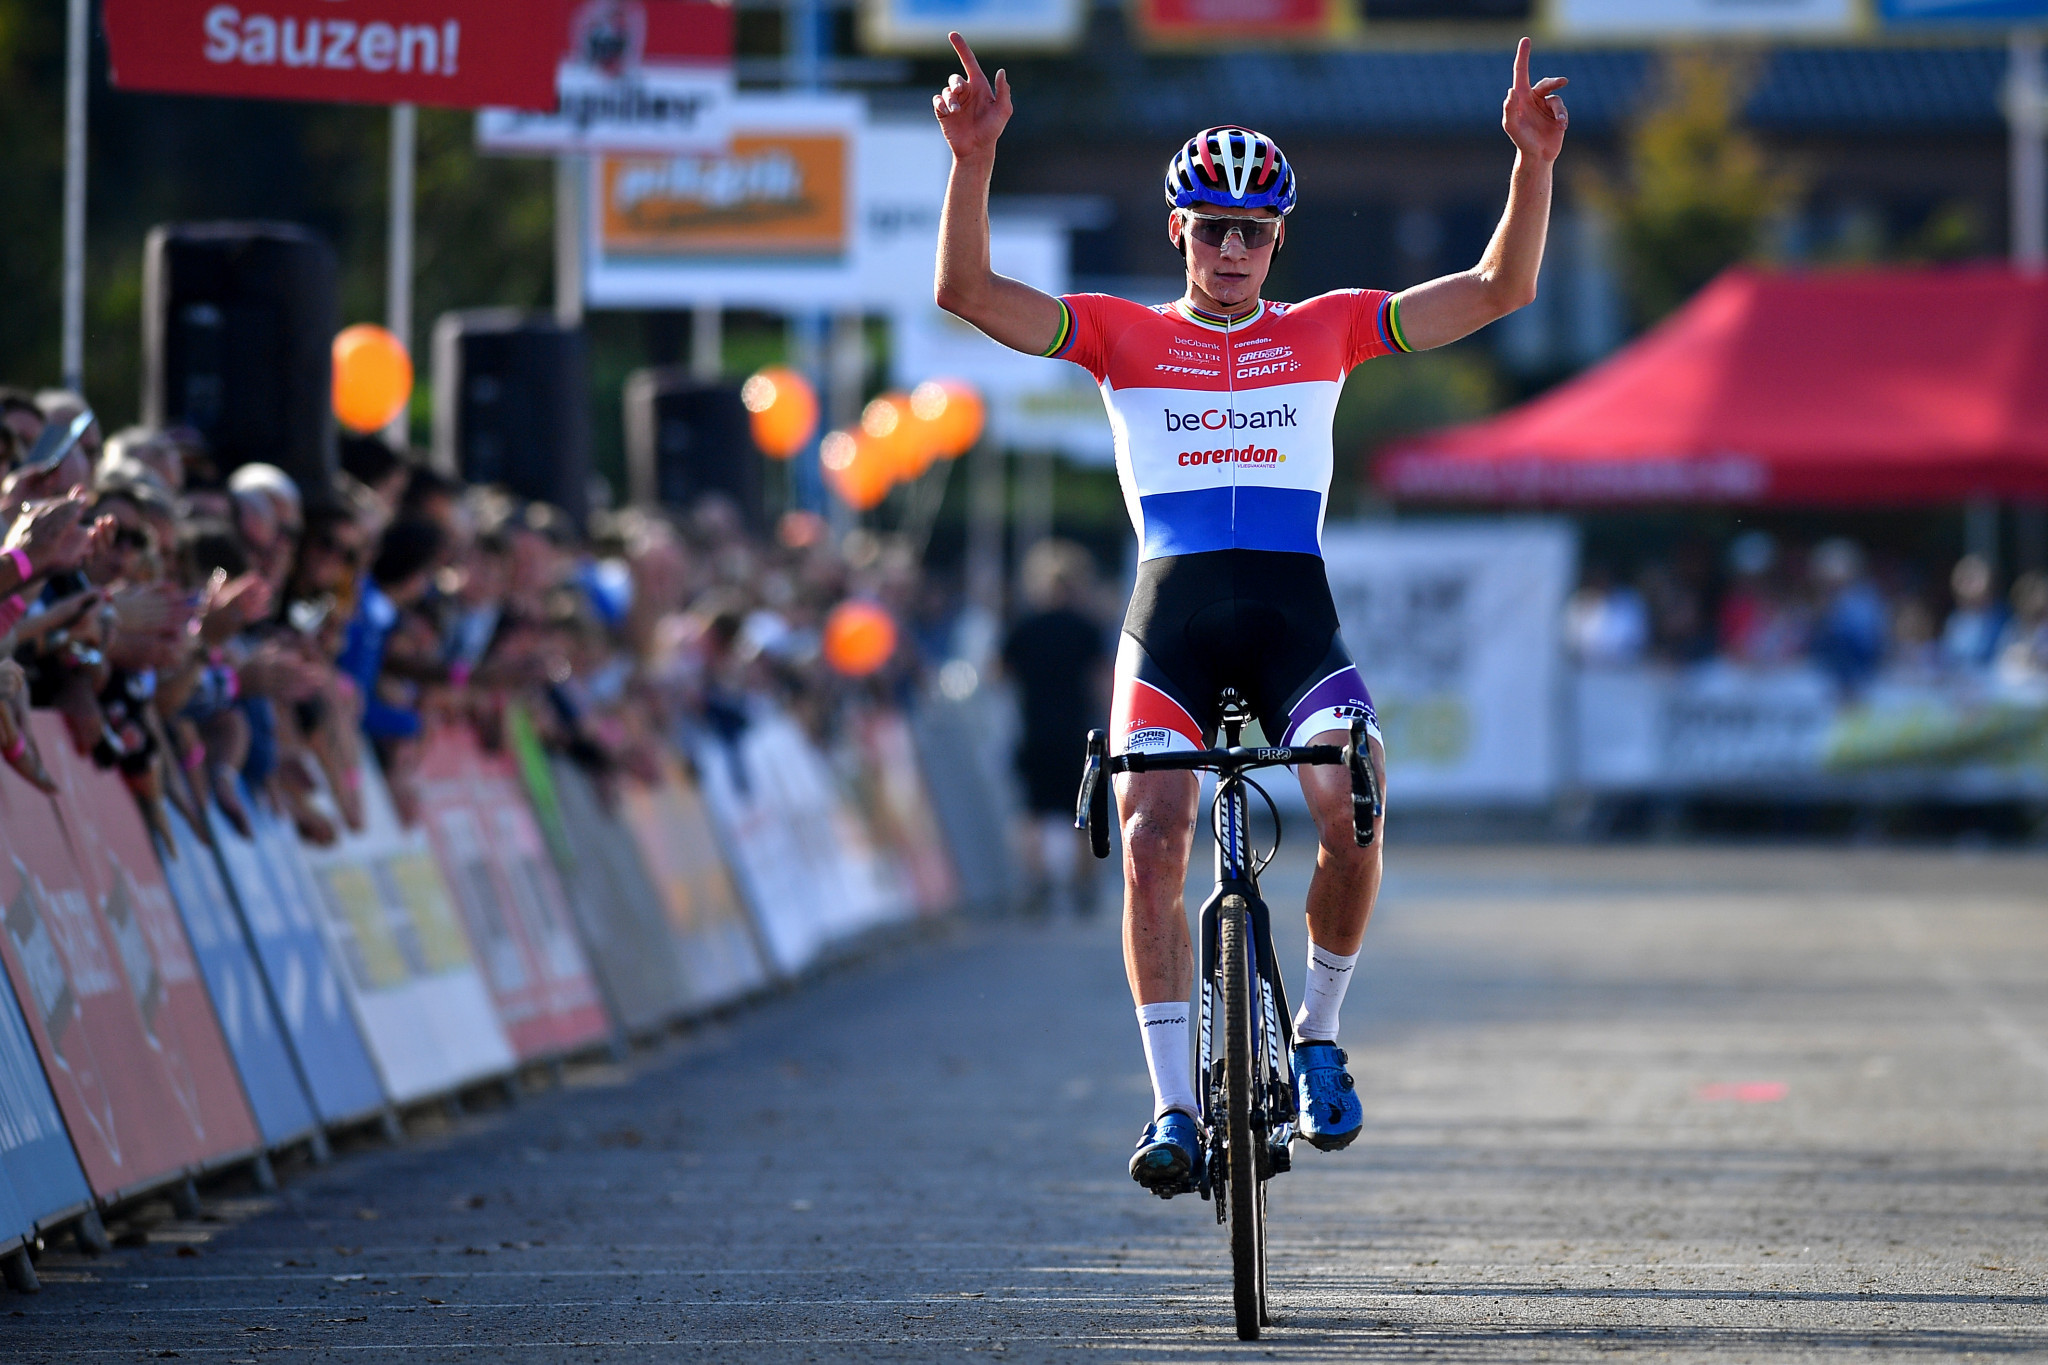 Van der Poel and Cant aim to strengthen grip on Cyclo-cross World Cup standings in Zeven